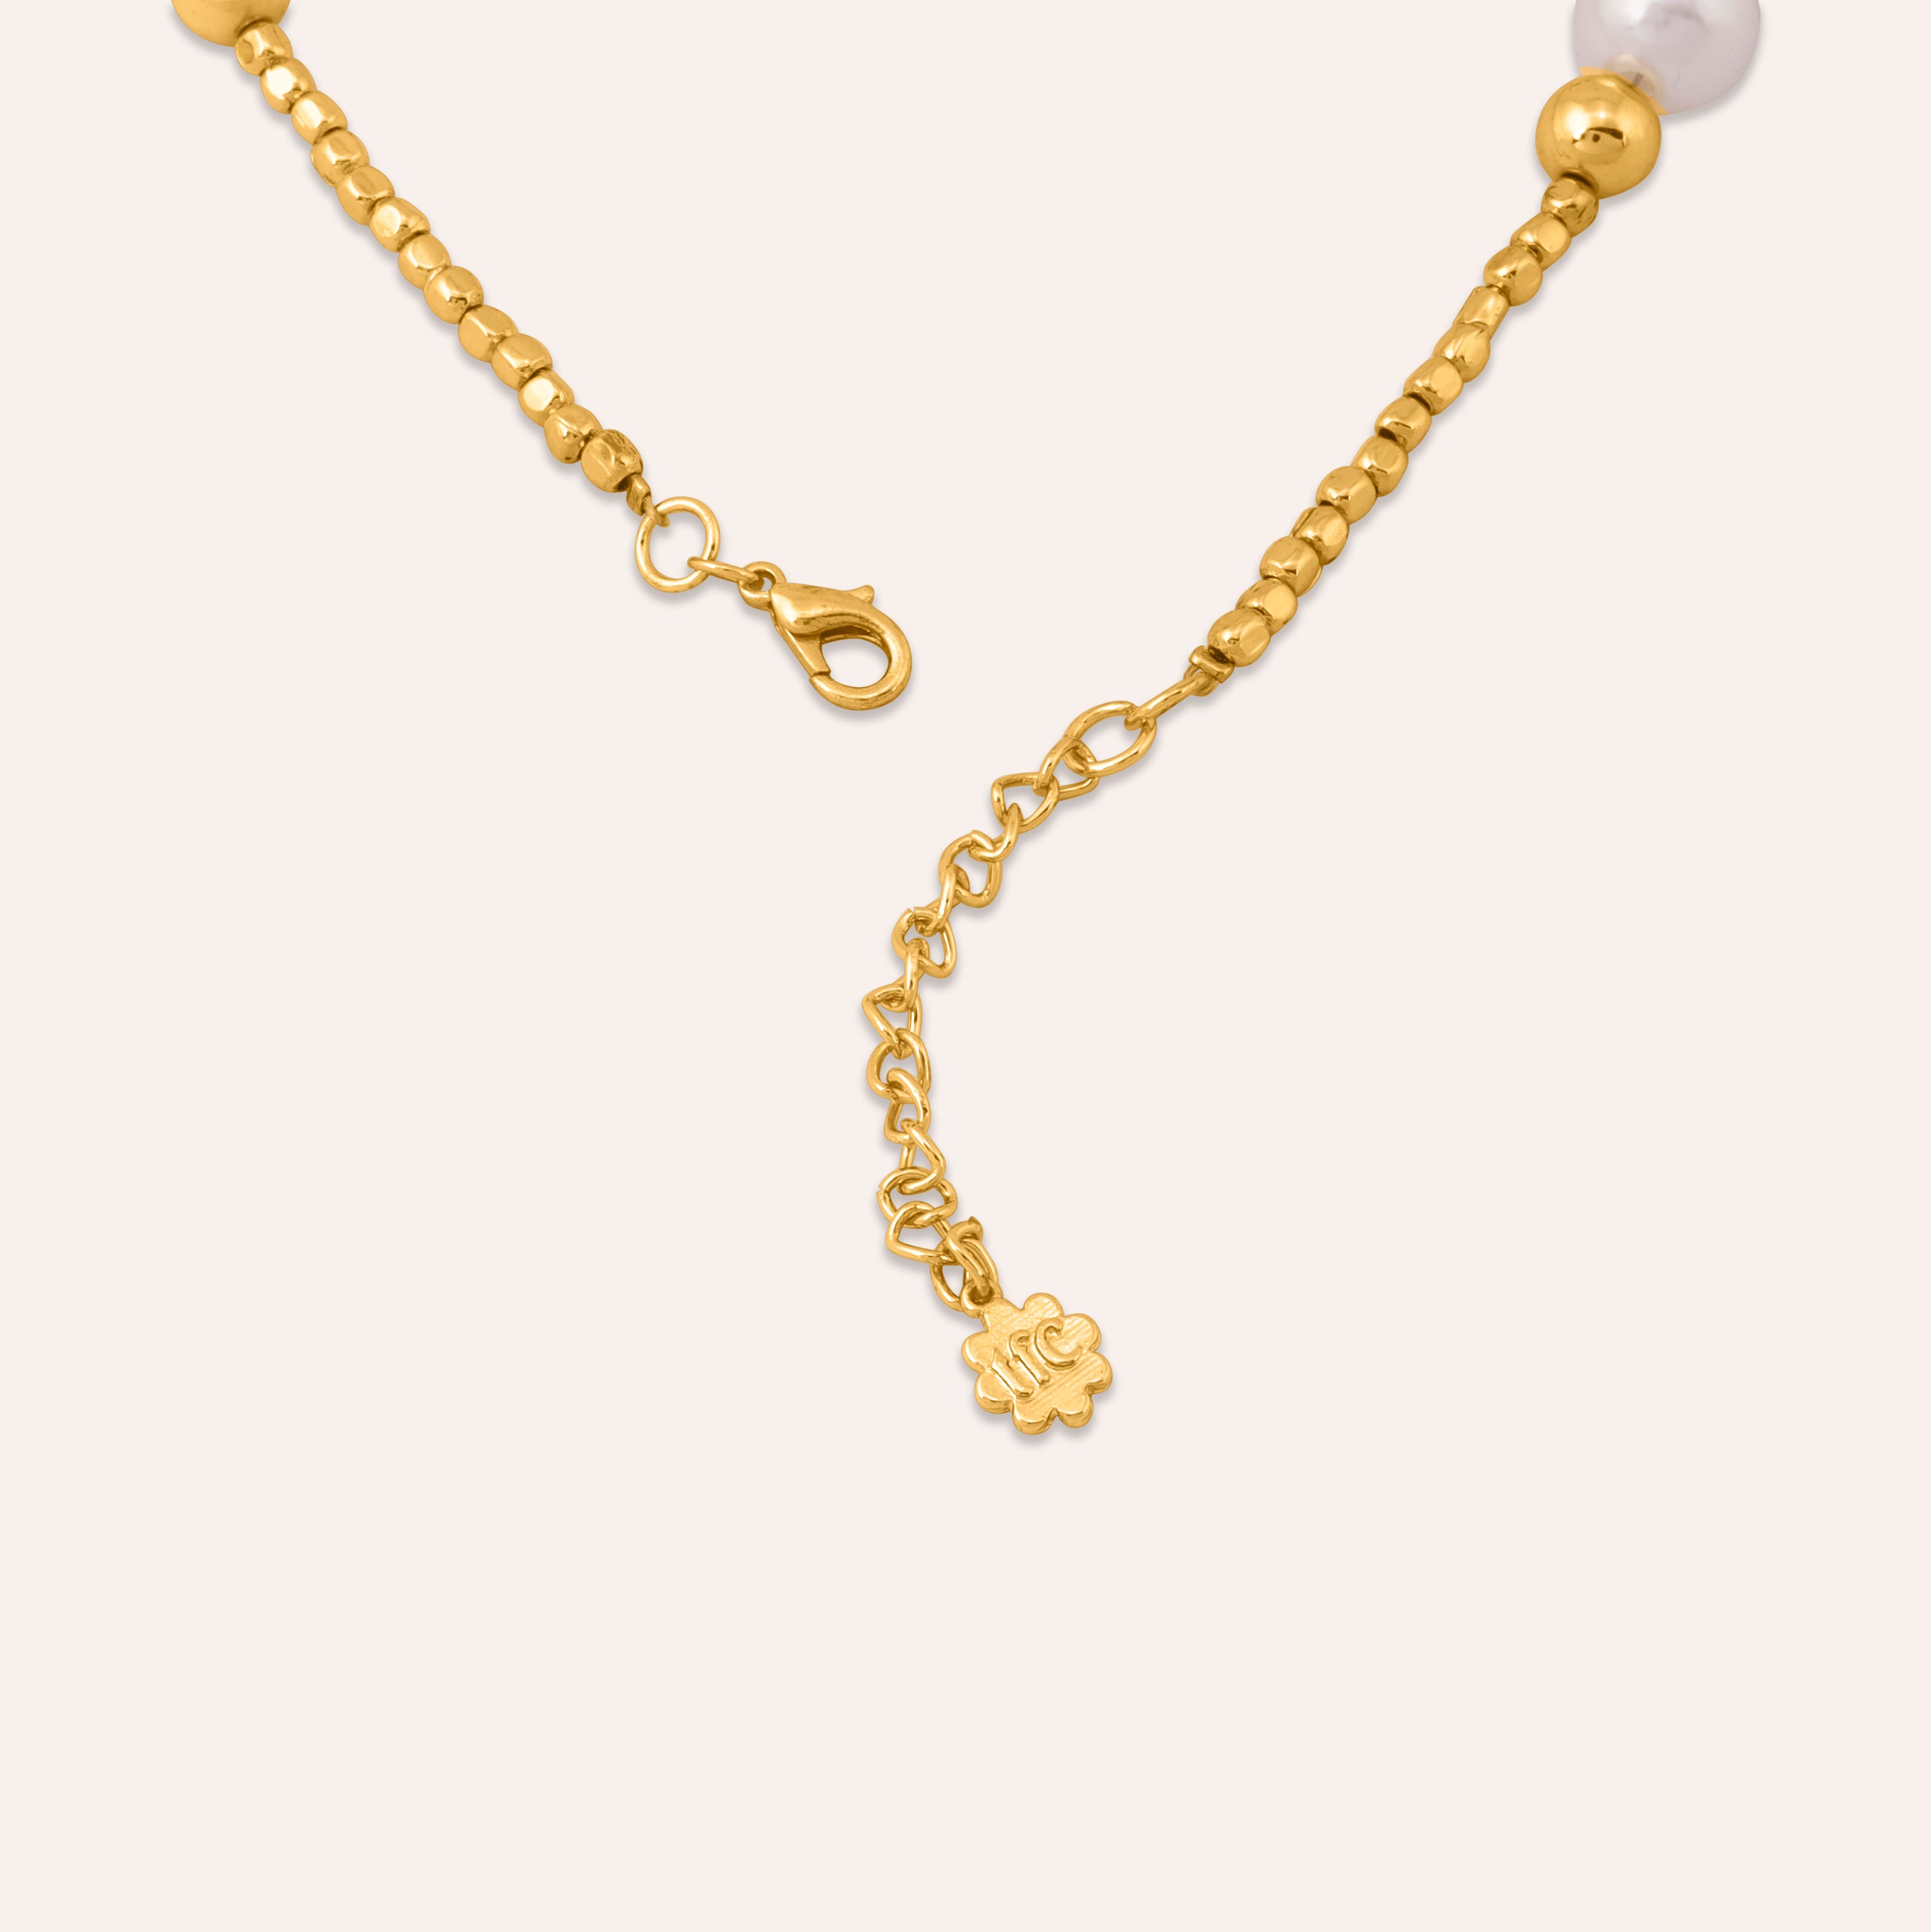 TFC Bold and Gold Pearl Beads Necklace